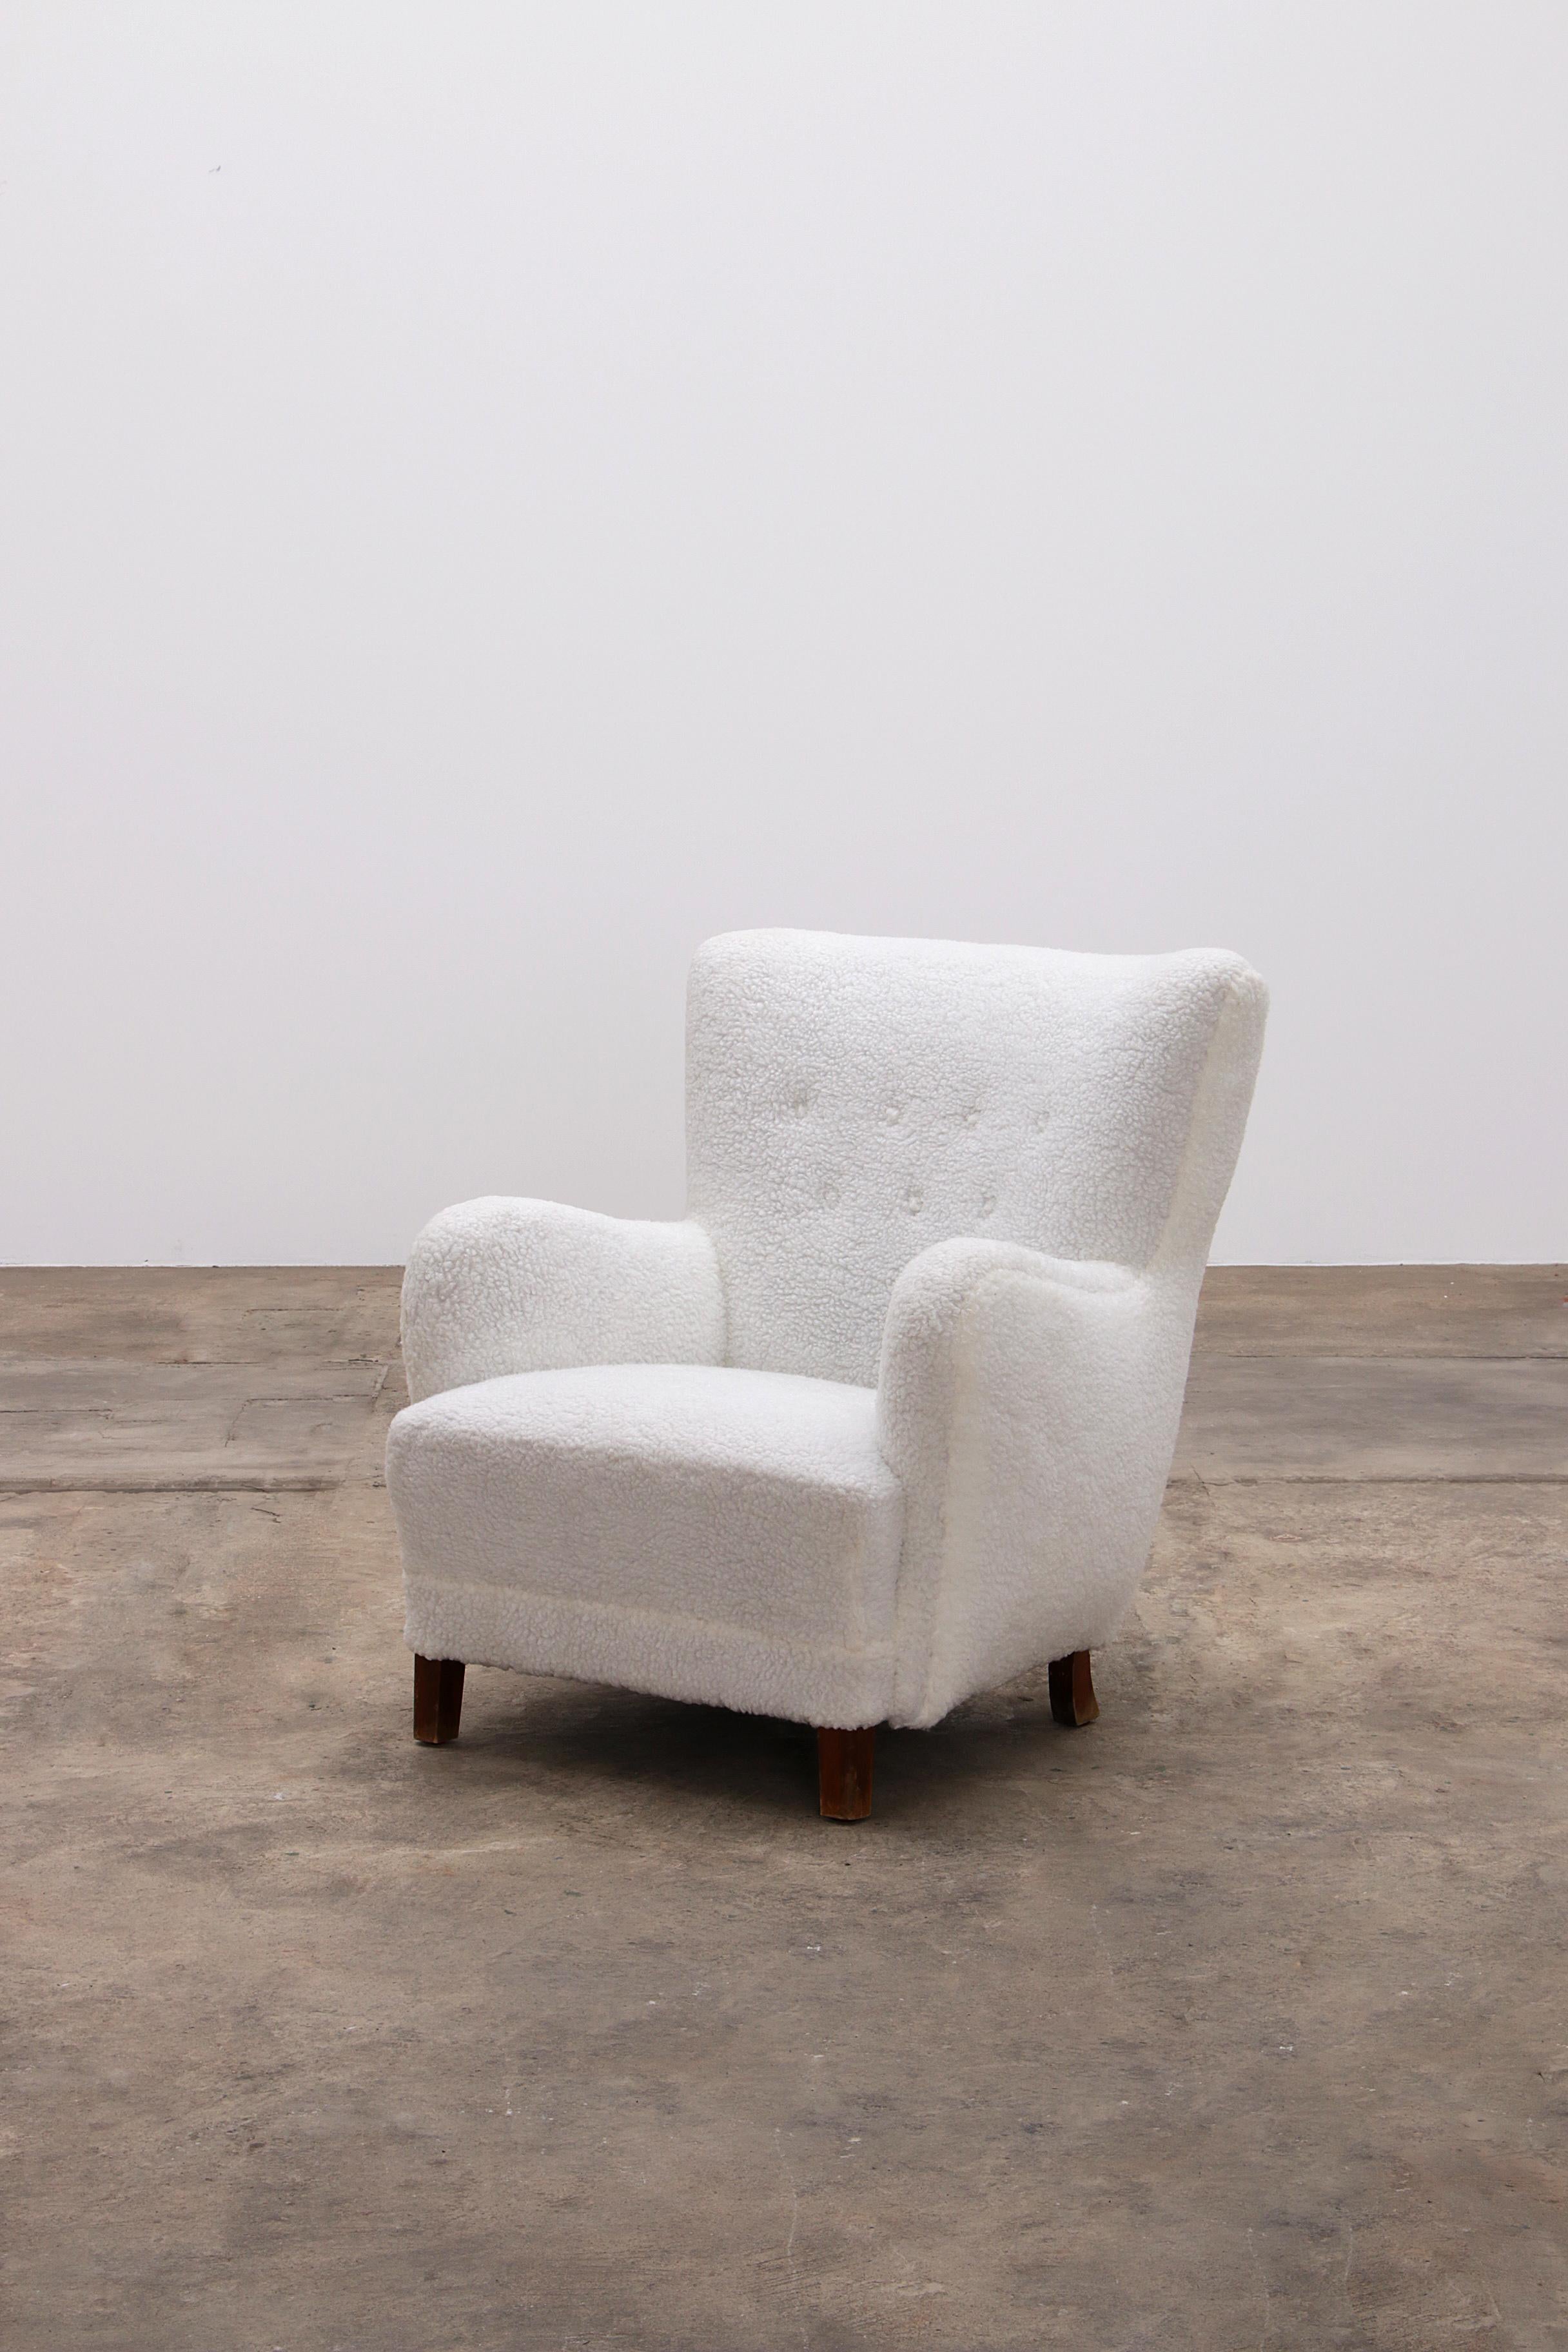 Fritz Hansen
Model 1669 Variant Armchair, ca 1950s
Armchair produced by Fritz Hansen in Denmark in the 50s. This model is a variant of the Model 1669 chair. The legs are original beech and the chair has been reupholstered with new woolen fabric.